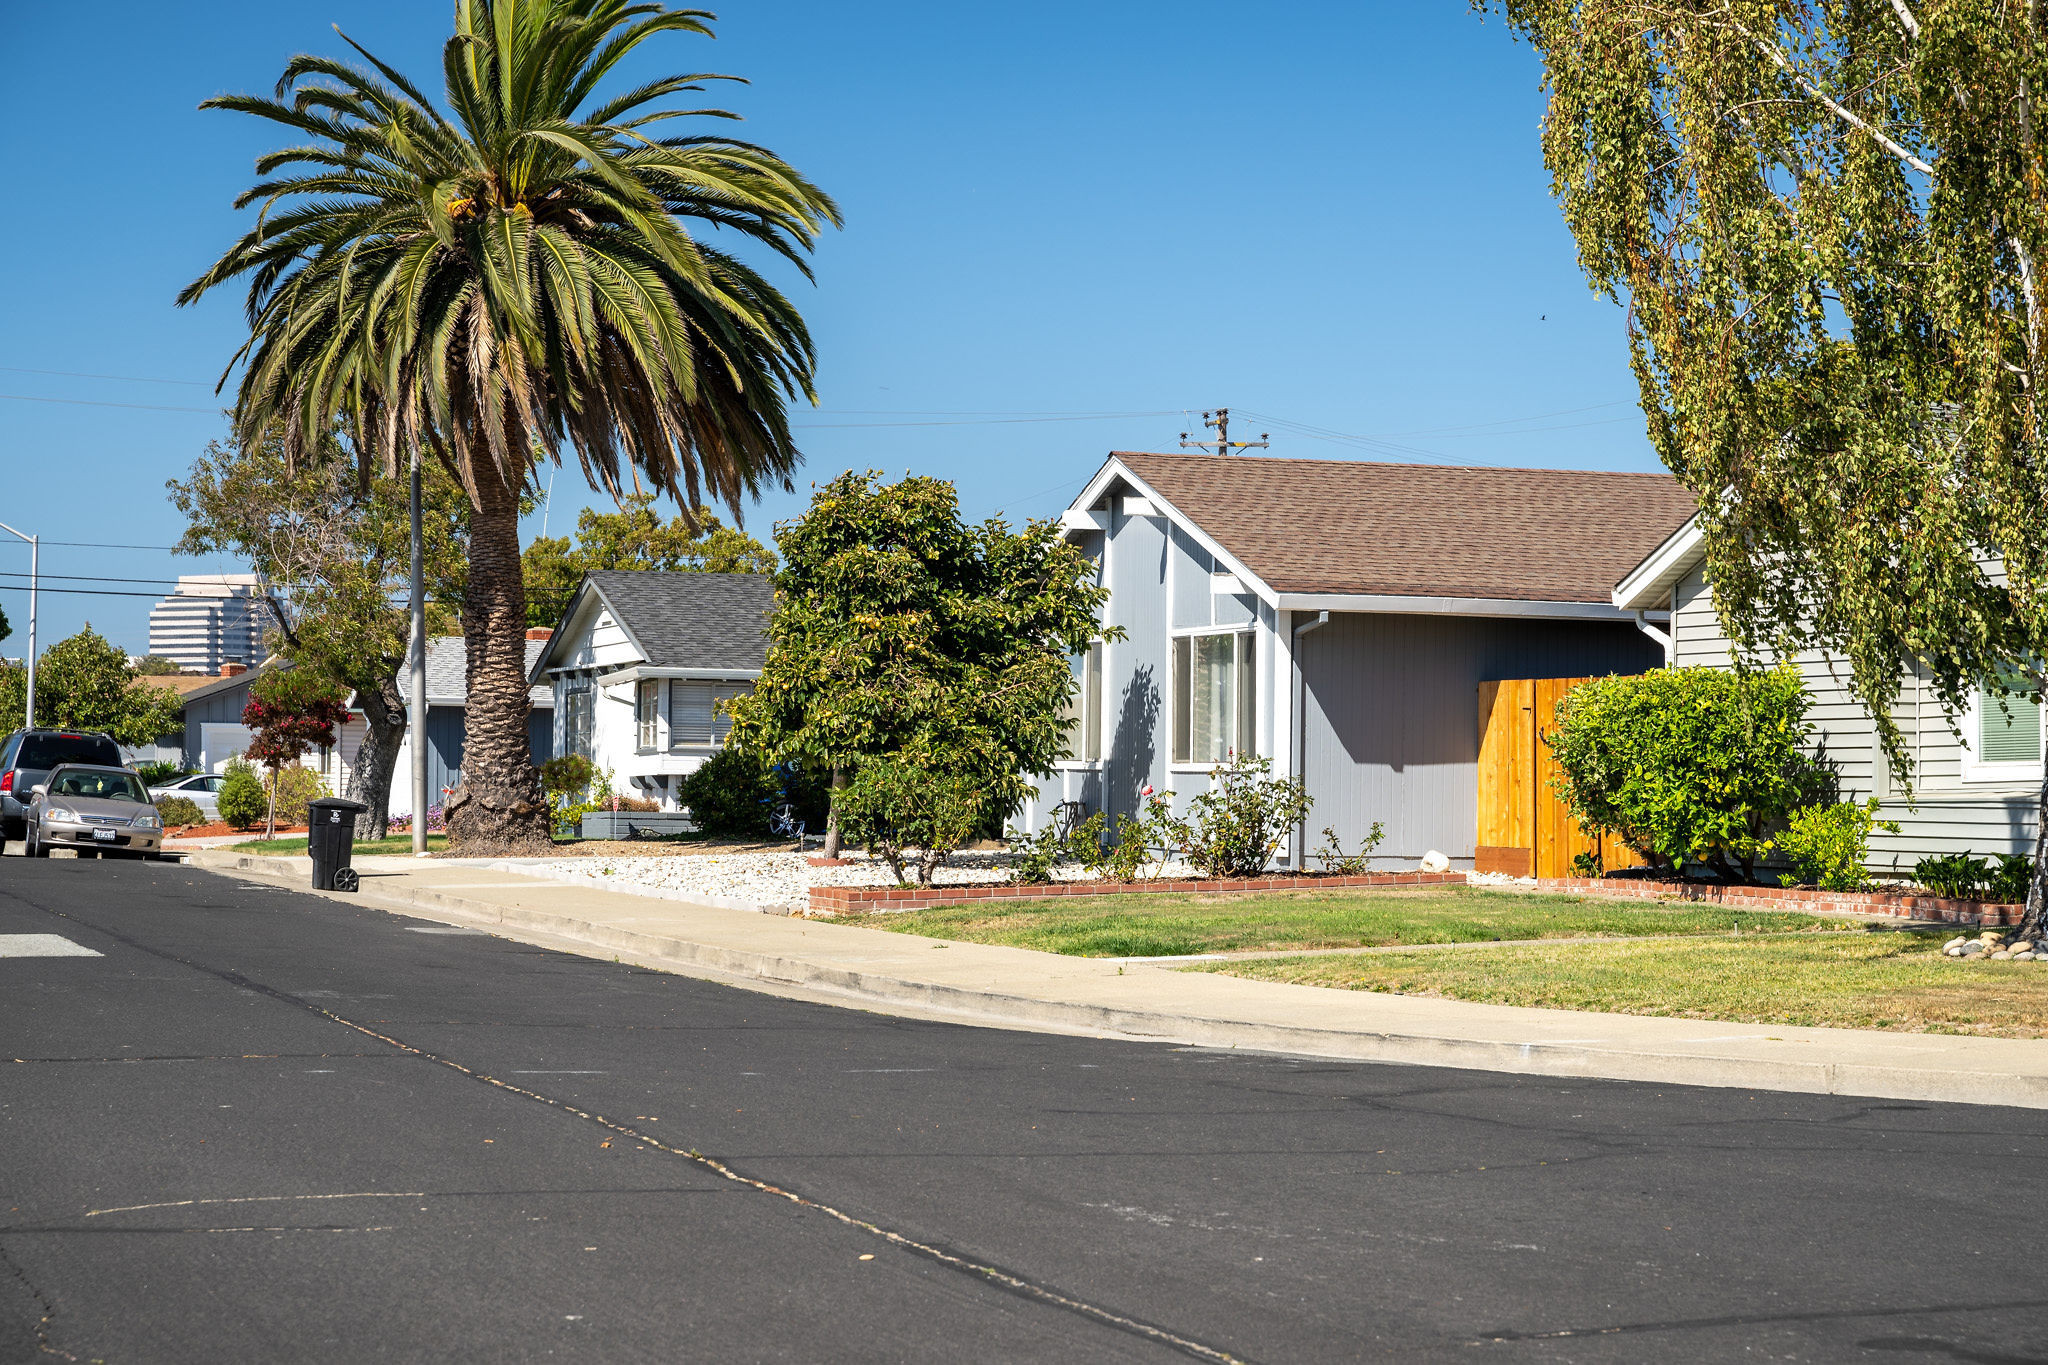 Street view with palm tree in the Los Prados area in San Mateo